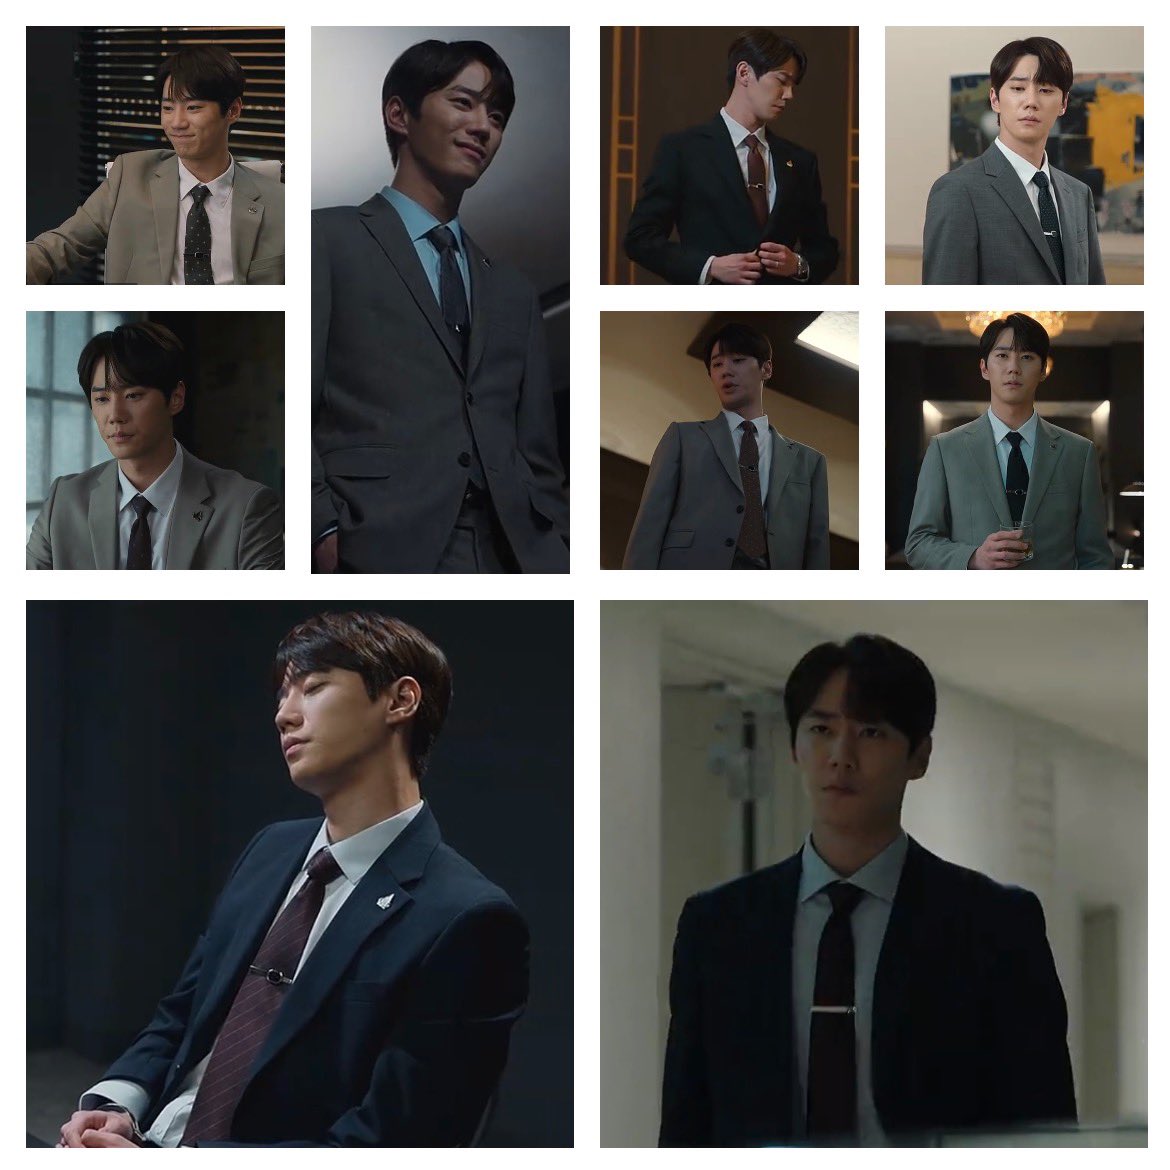 #LeeJunYoung got suited up in #TheImpossibleHeir 
It was roughly abt 32 different full suit & tie. He looks dapper & smart 😎
The first 5 is my fav 😍